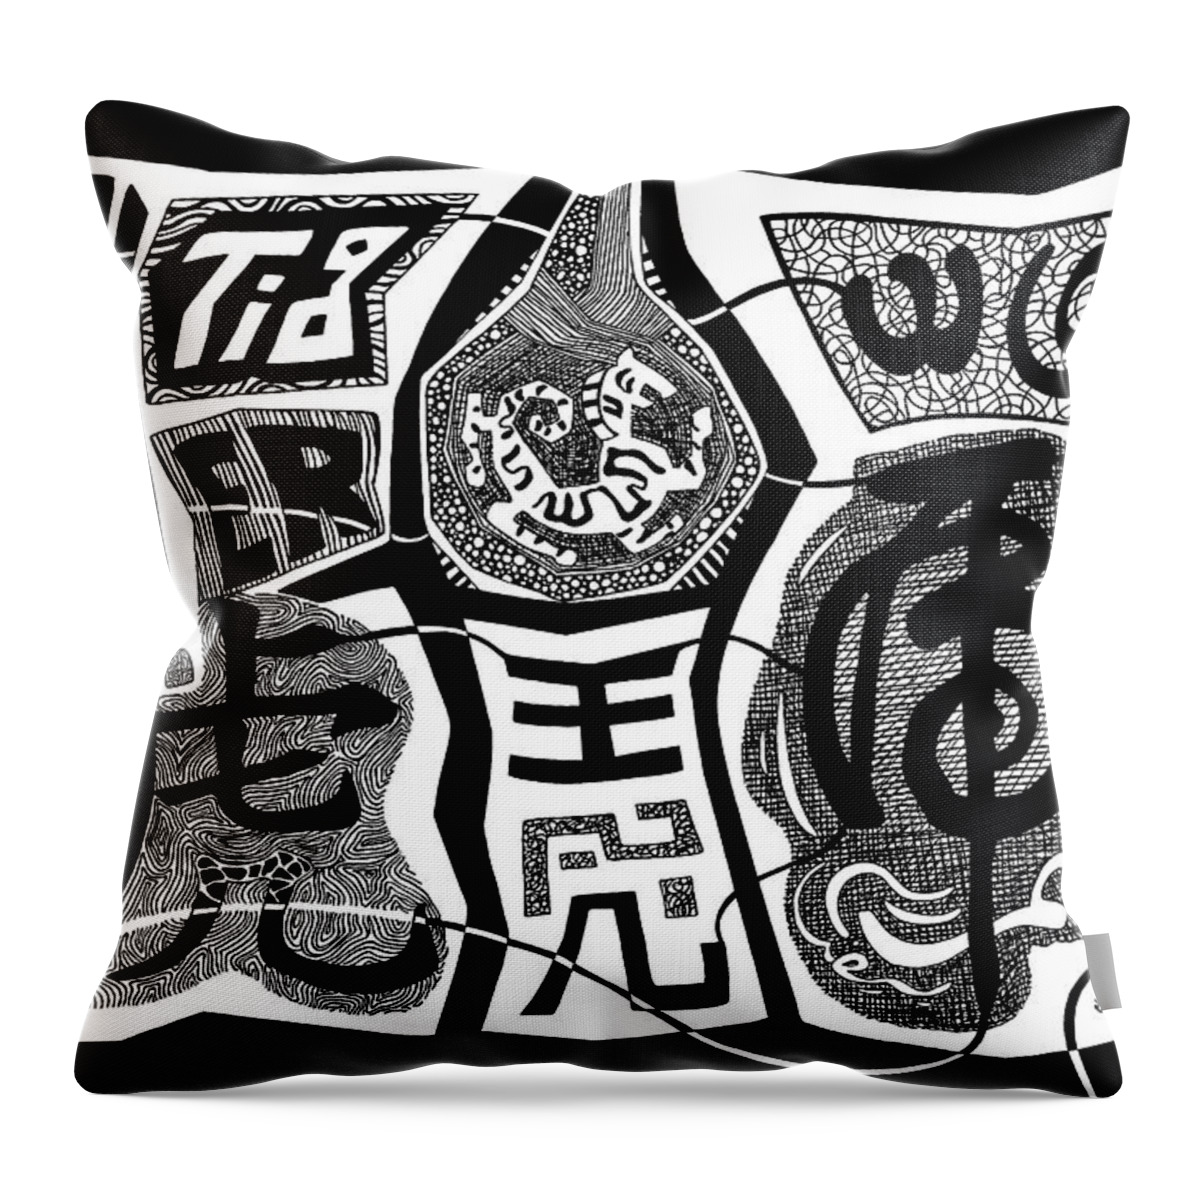 Chinese Throw Pillow featuring the drawing Tiger 1 by Ousama Lazkani